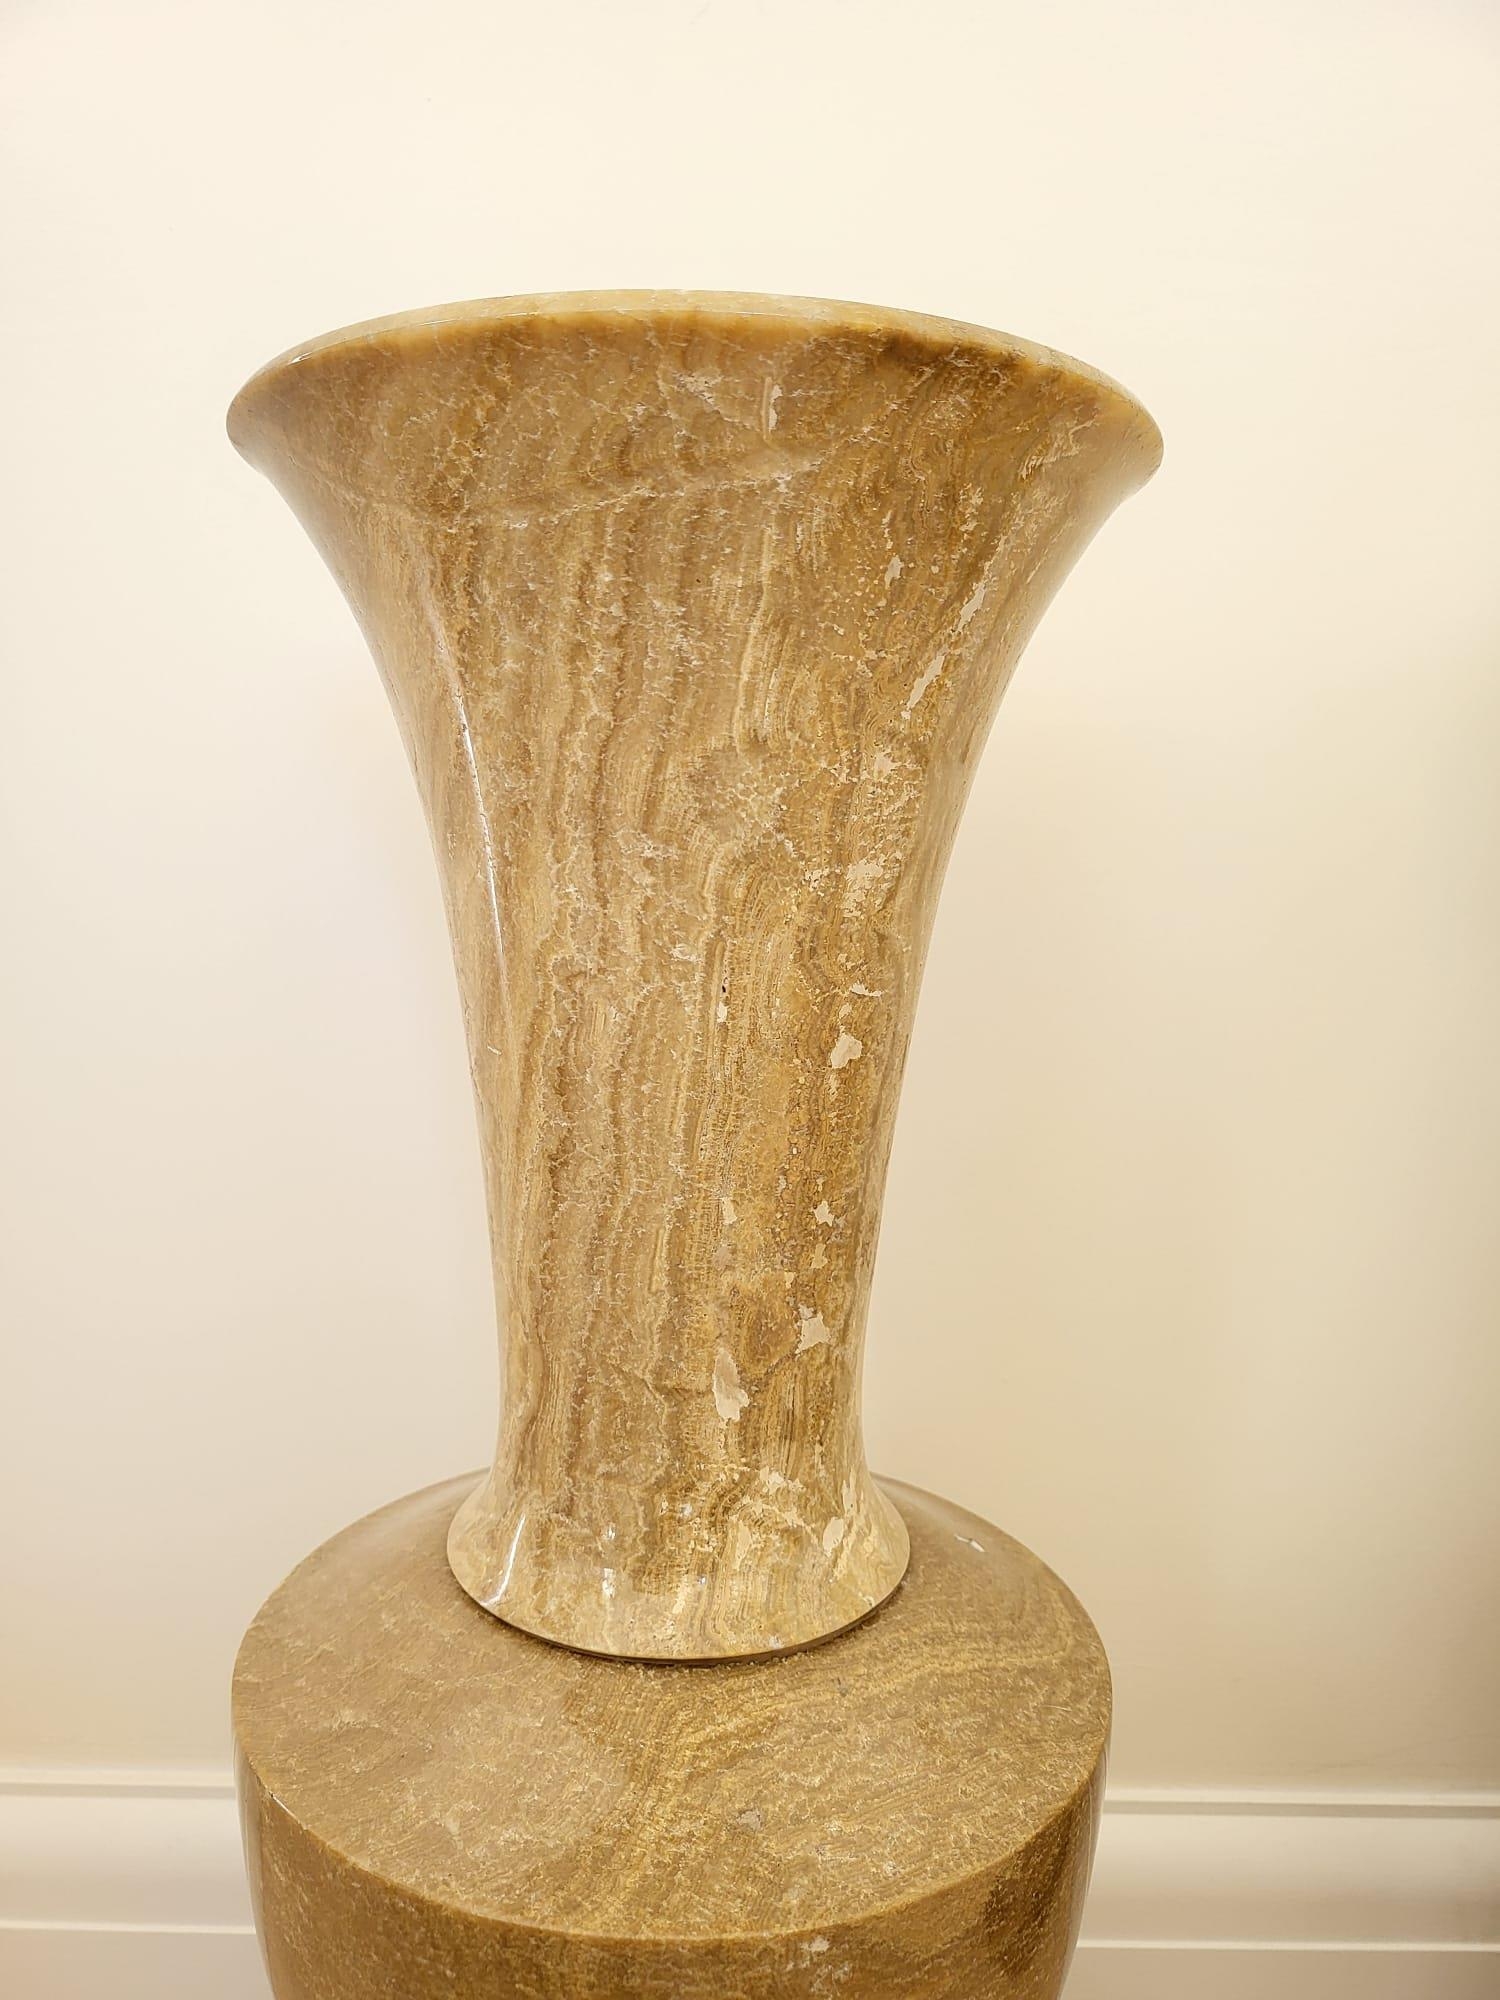 A Pair of Large Beige Polished Stone Vases. Both on dark wooden stands. 56cm tall. 20cm width. - Image 2 of 7